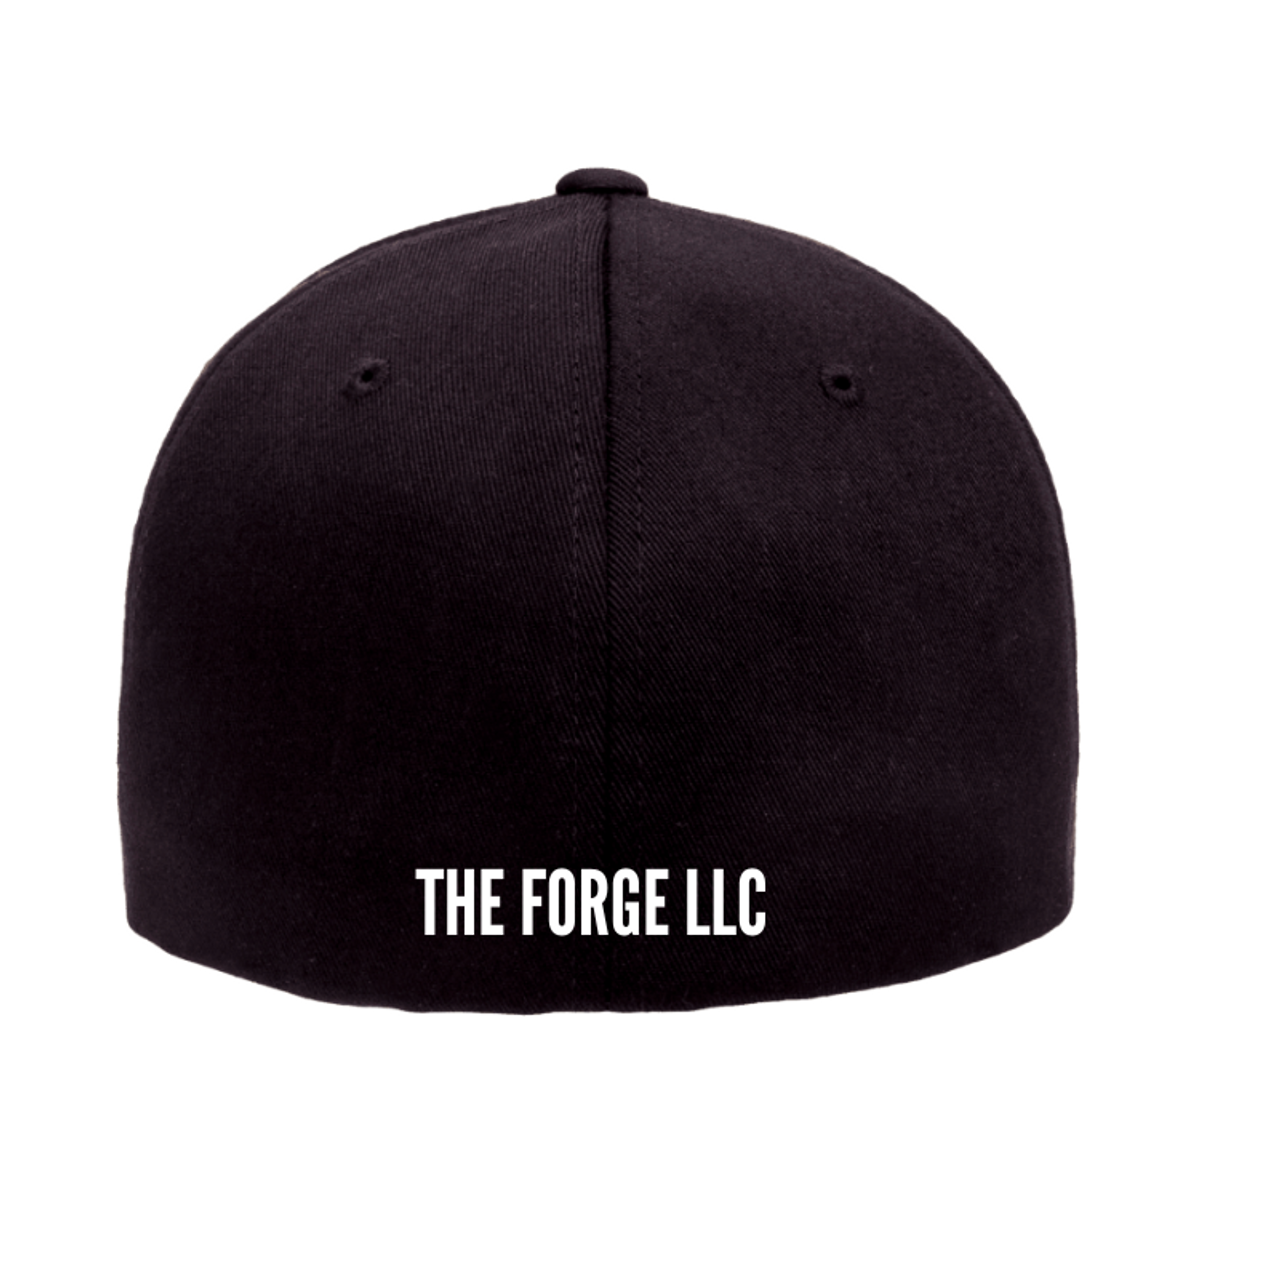 The Forge LLC - Fitted Ballcap